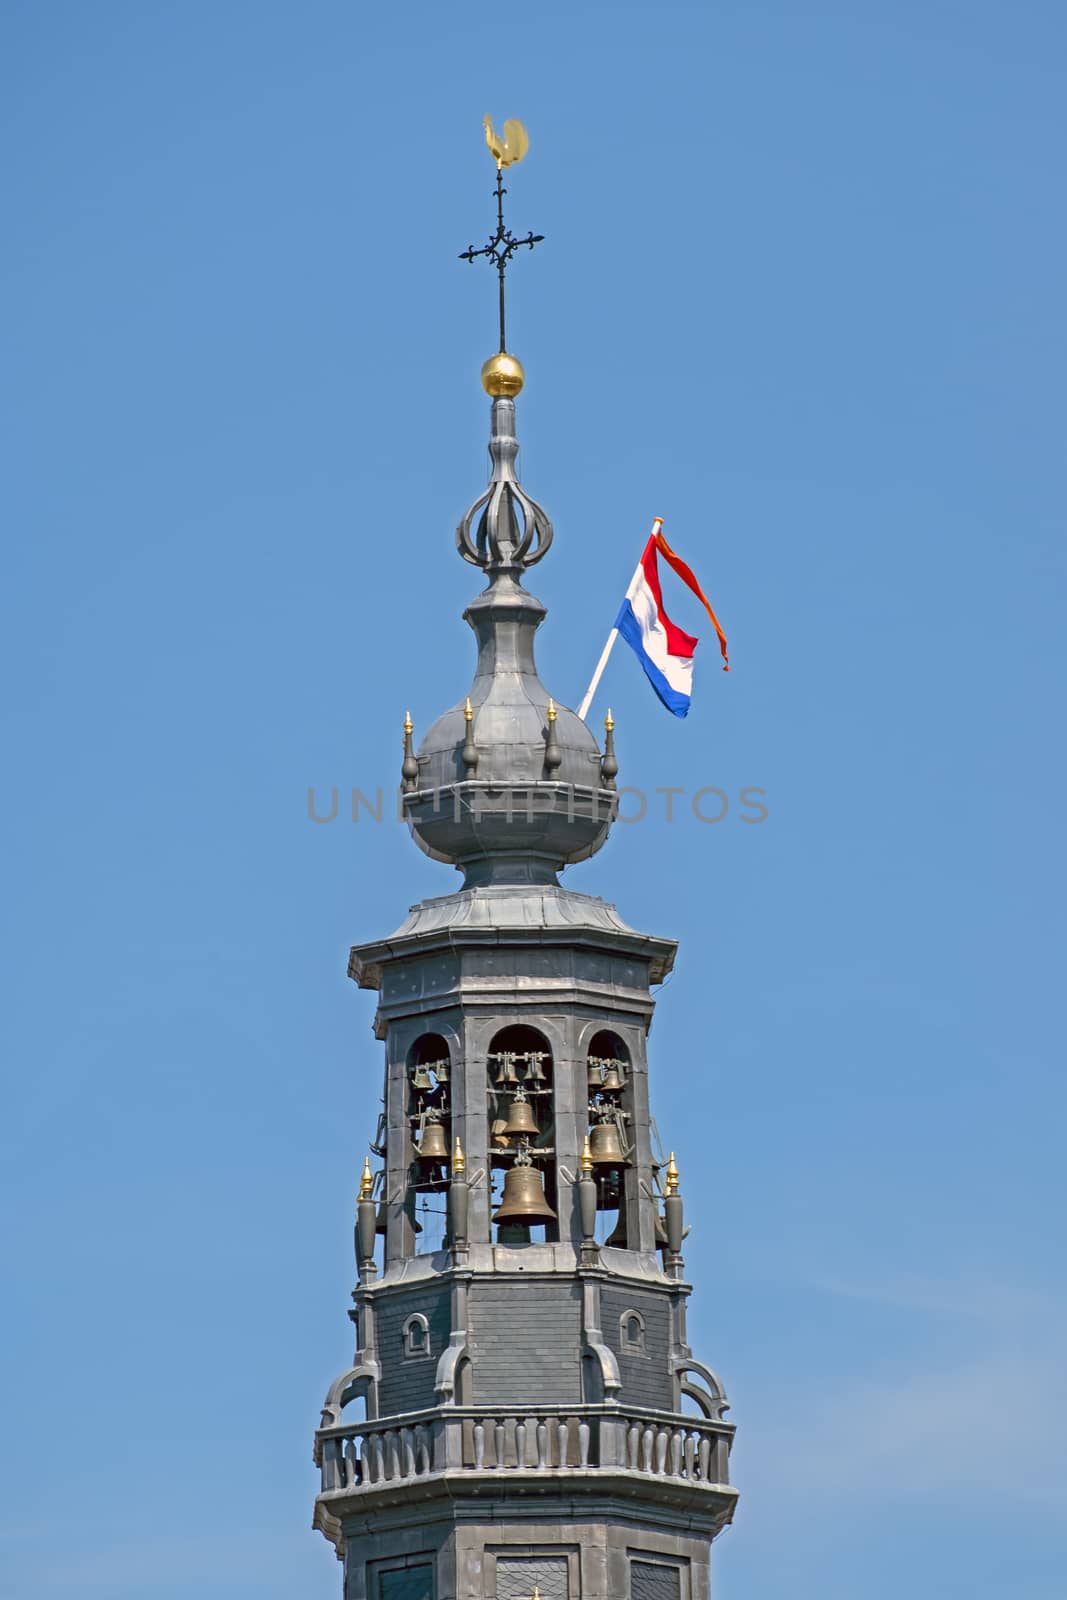 Tower of the Zuiderkerk in Amsterdam Netherlands at kingsday by devy